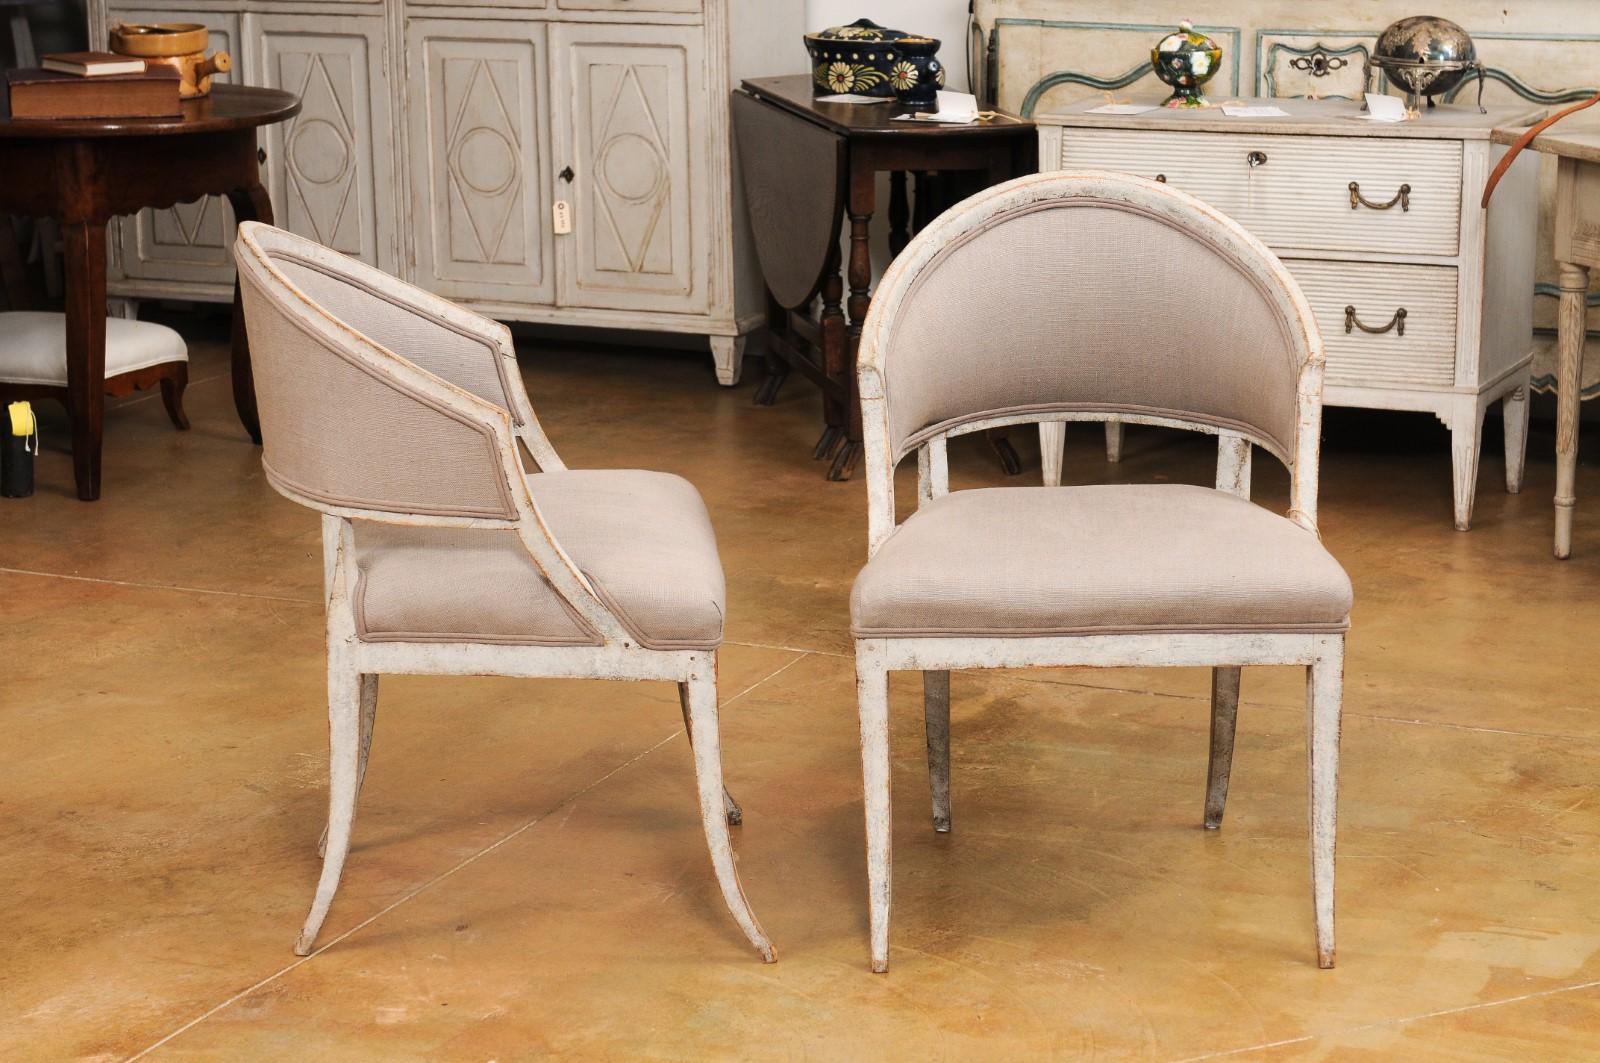 A pair of Swedish Gustavian period painted wood tub chairs circa 1800 with horseshoe backs, saber legs and linen grey/brown upholstery. Experience the understated elegance of this pair of Swedish Gustavian period painted wood tub chairs, dating back